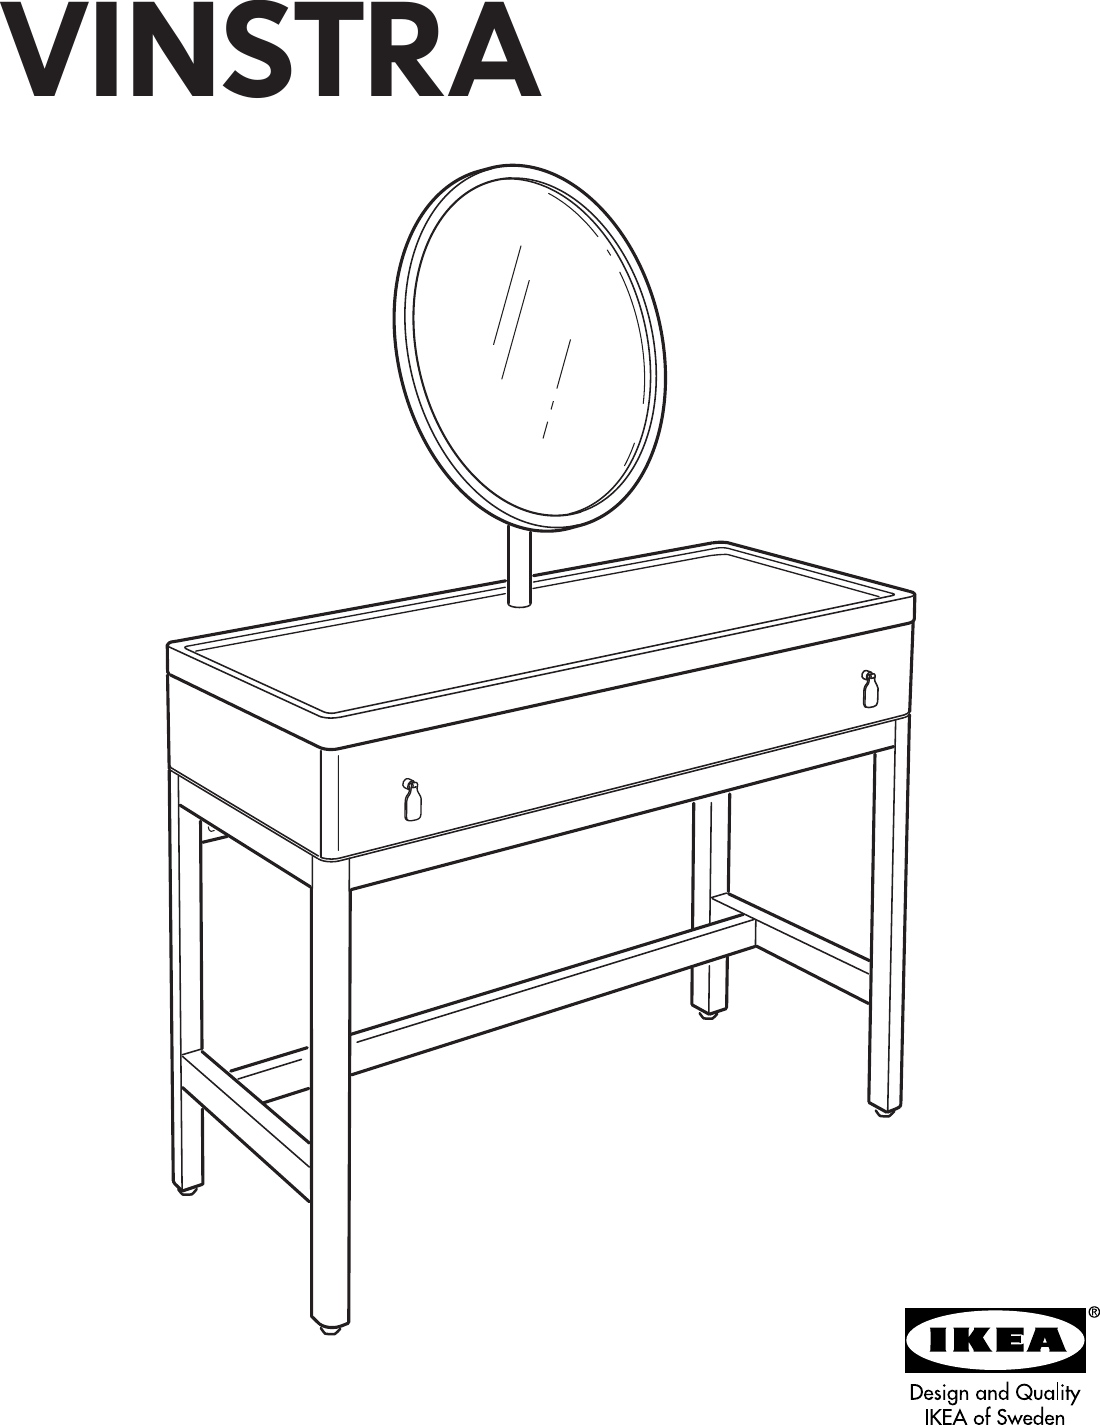 Ikea Vinstra Dressing Table W Mirror Assembly Instruction